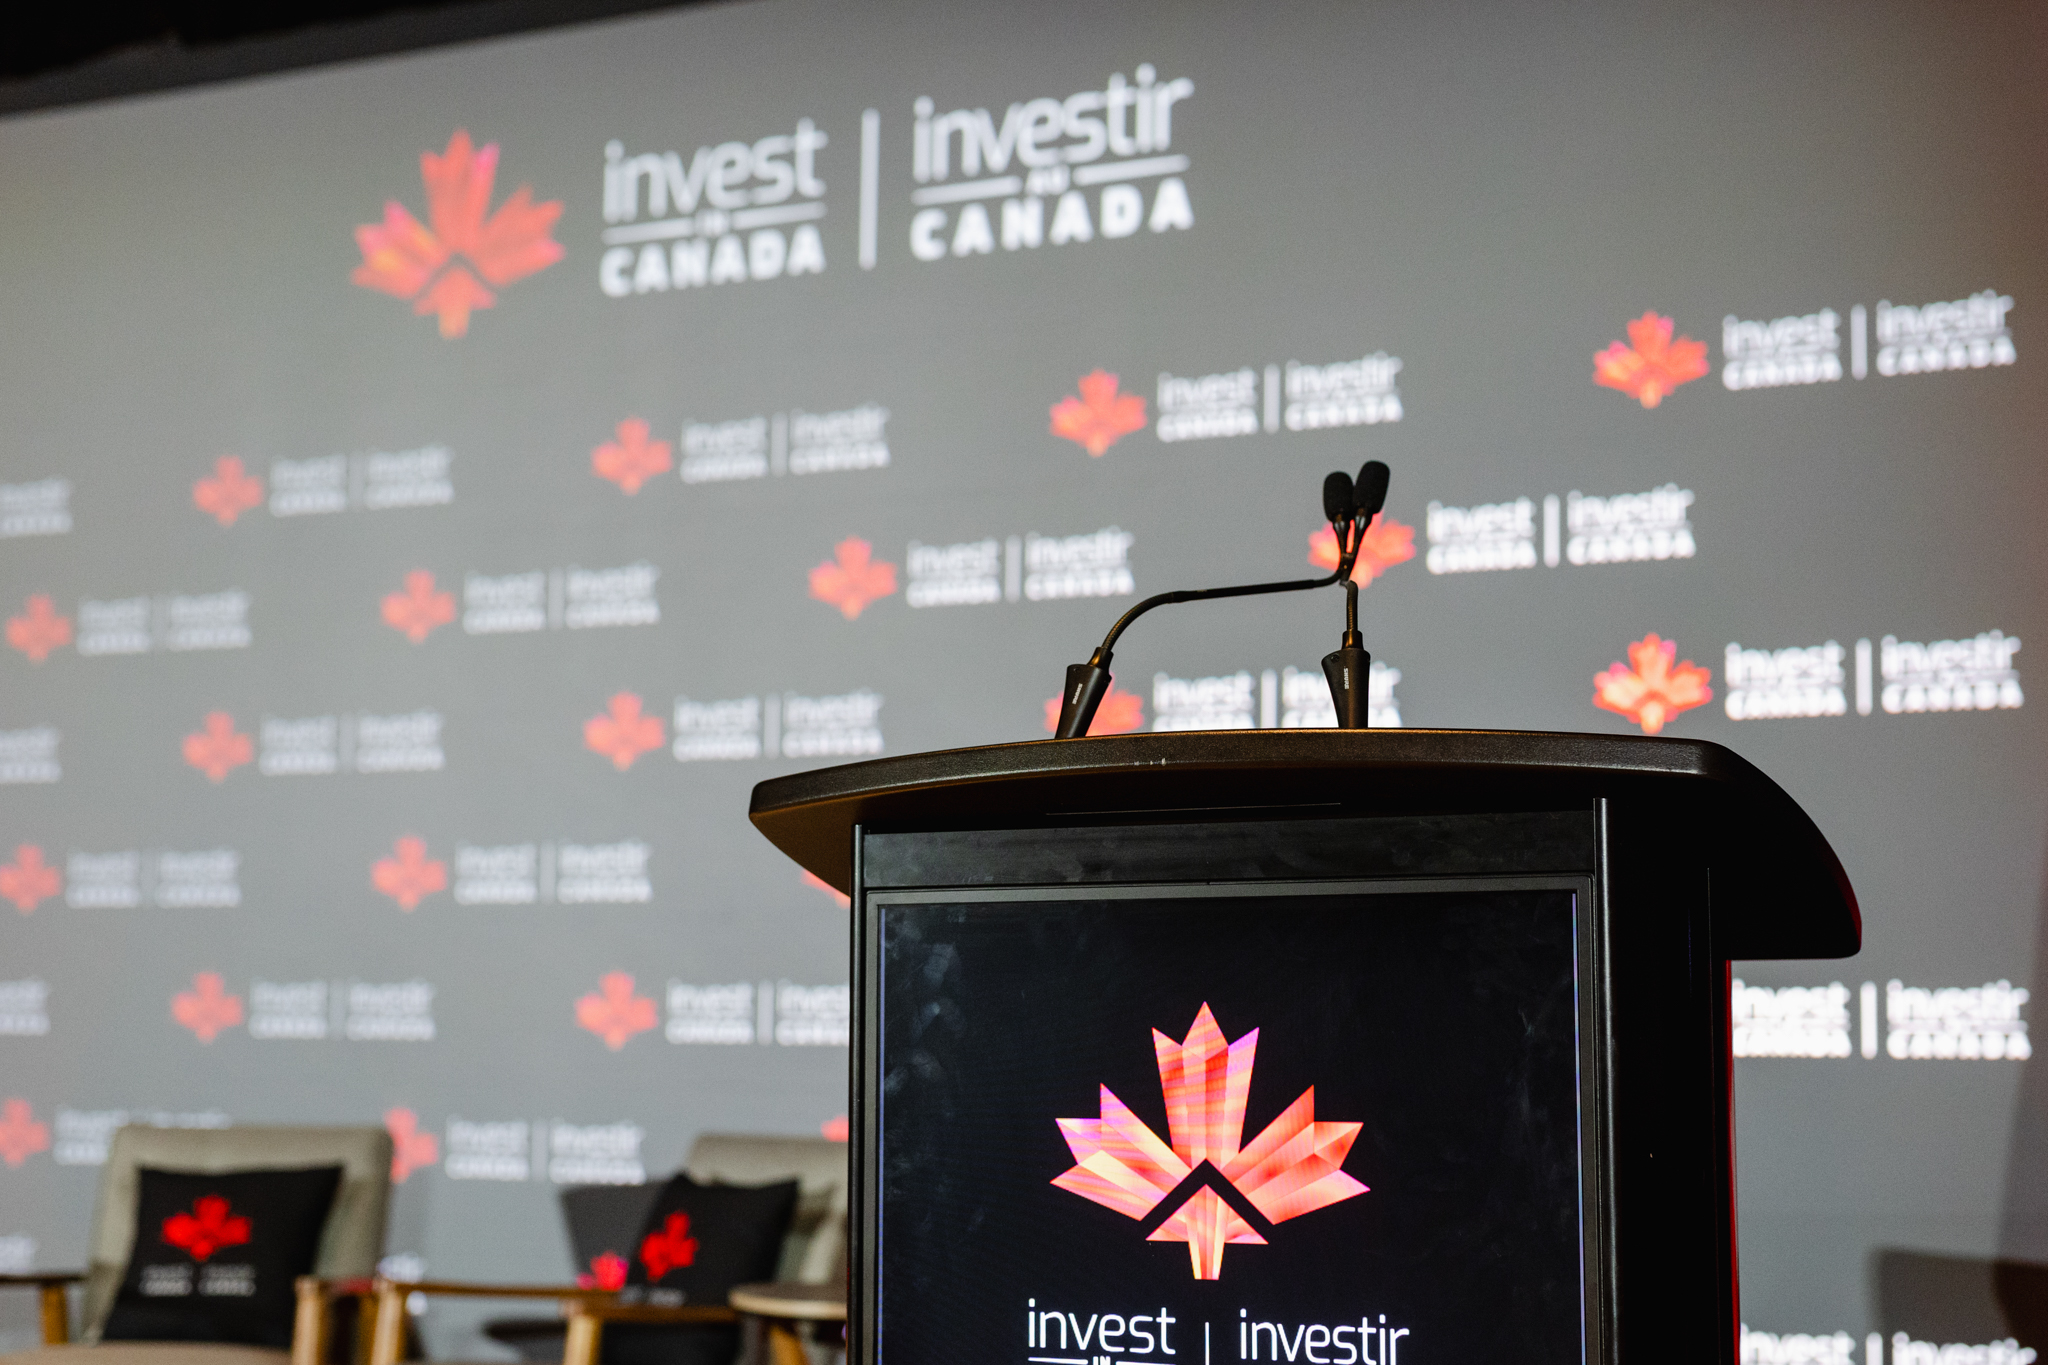 Event photography of a podium with a microphone set against a backdrop featuring multiple "invest in Canada" logos.